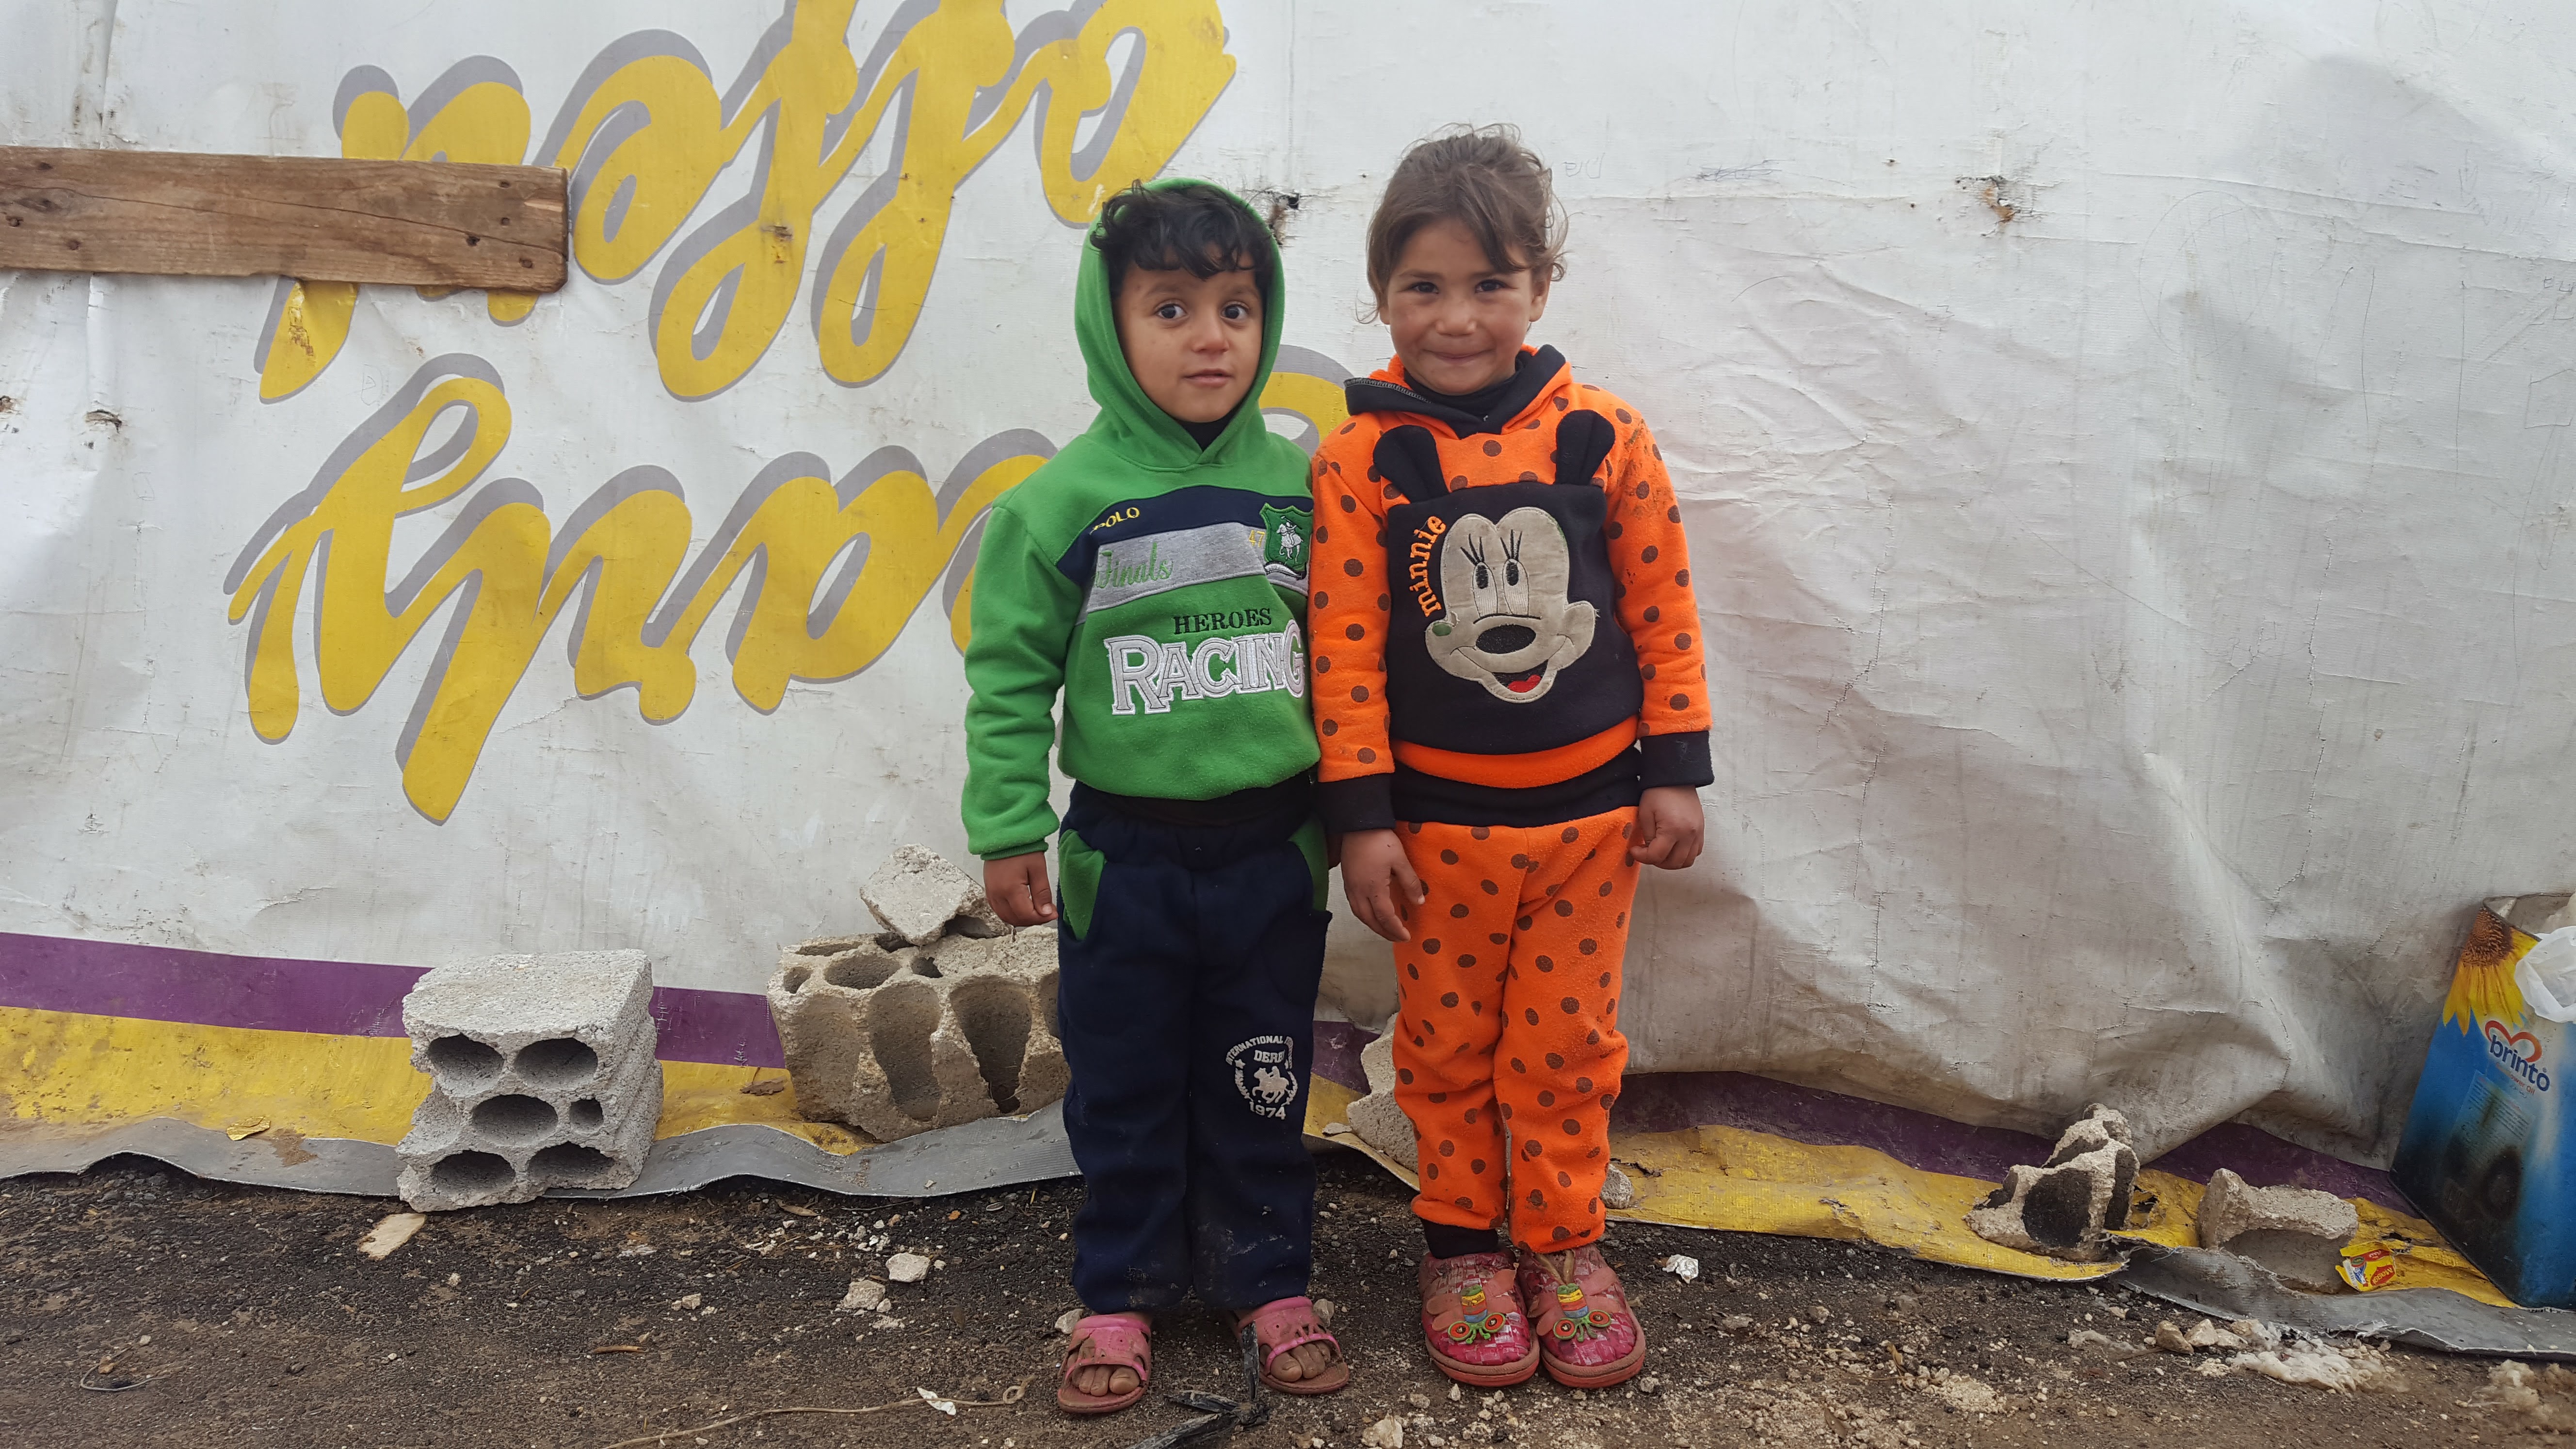 A lifeline for Syrian refugees during the cold months, UNHCR’s winter plan supported by Kuwait